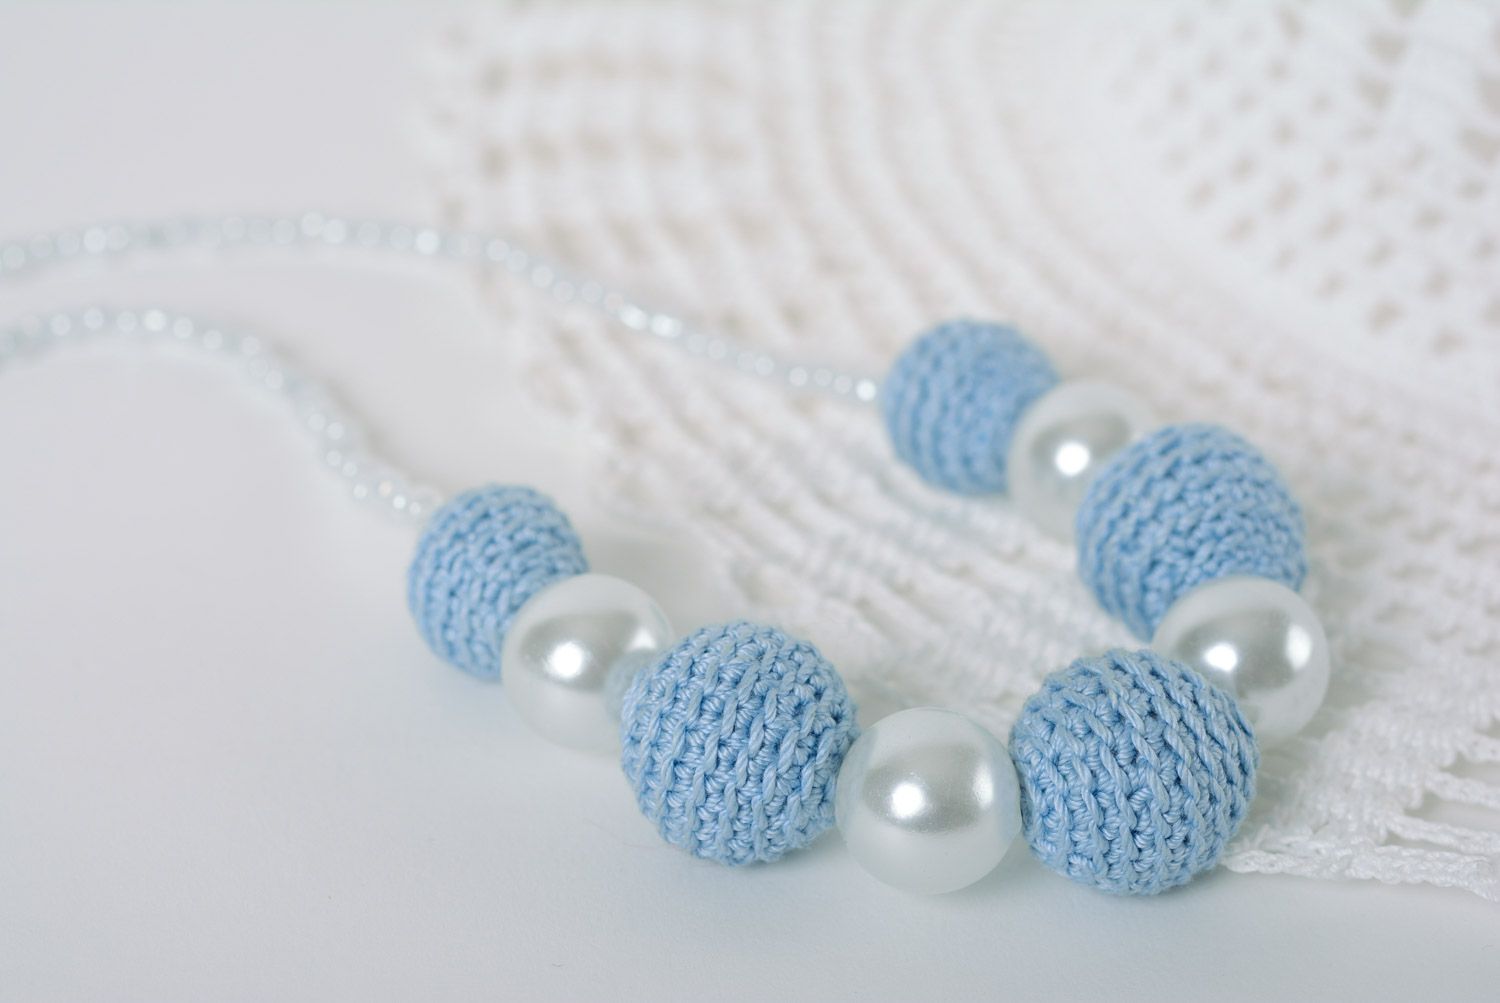 Handmade teething bead necklace crocheted of blue cotton threads for babies photo 1